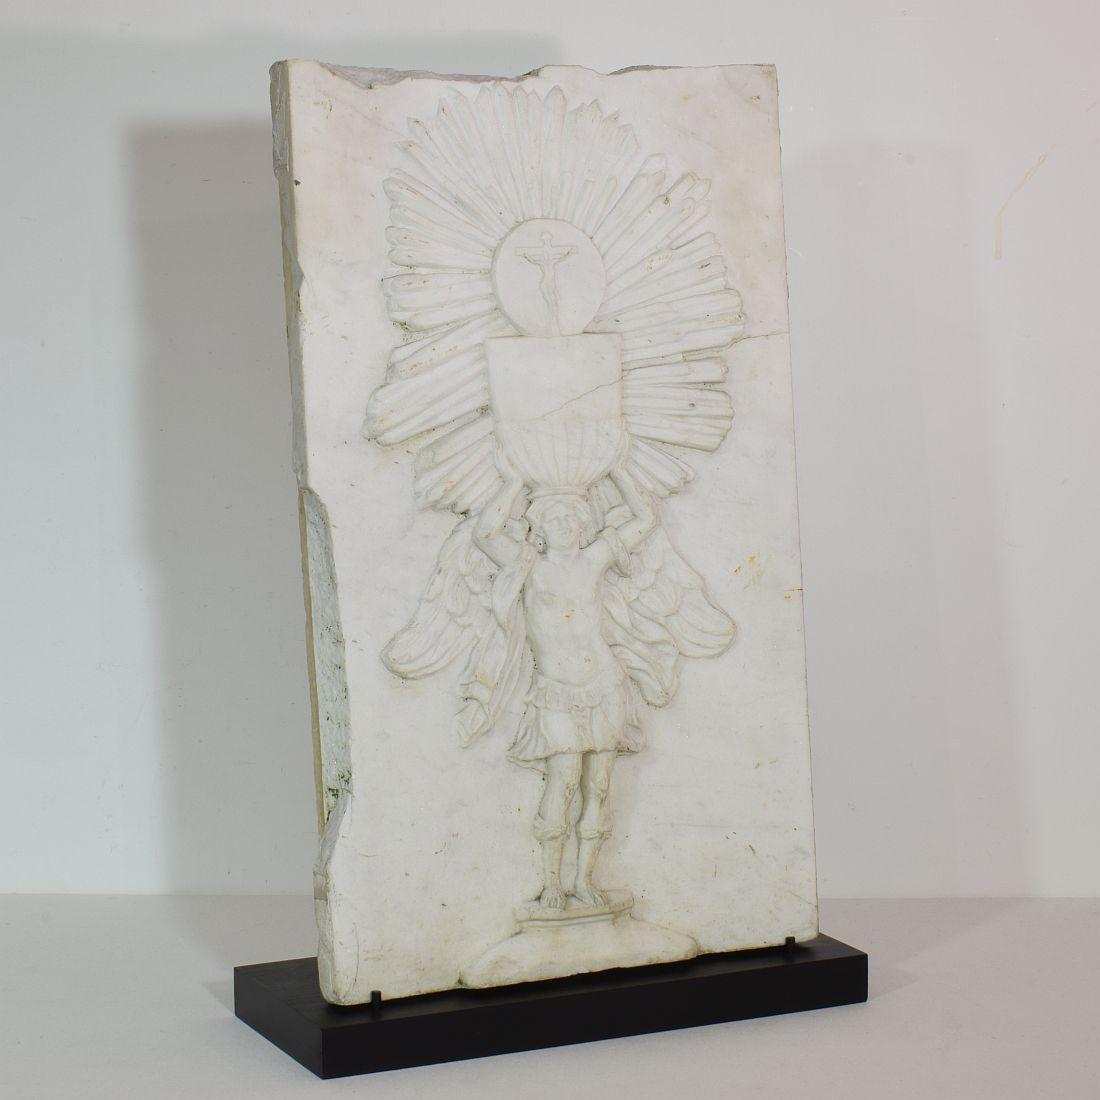 Hand-Carved Italian 17/18th Century Marble Baroque Panel with Archangel Holding a Chalice